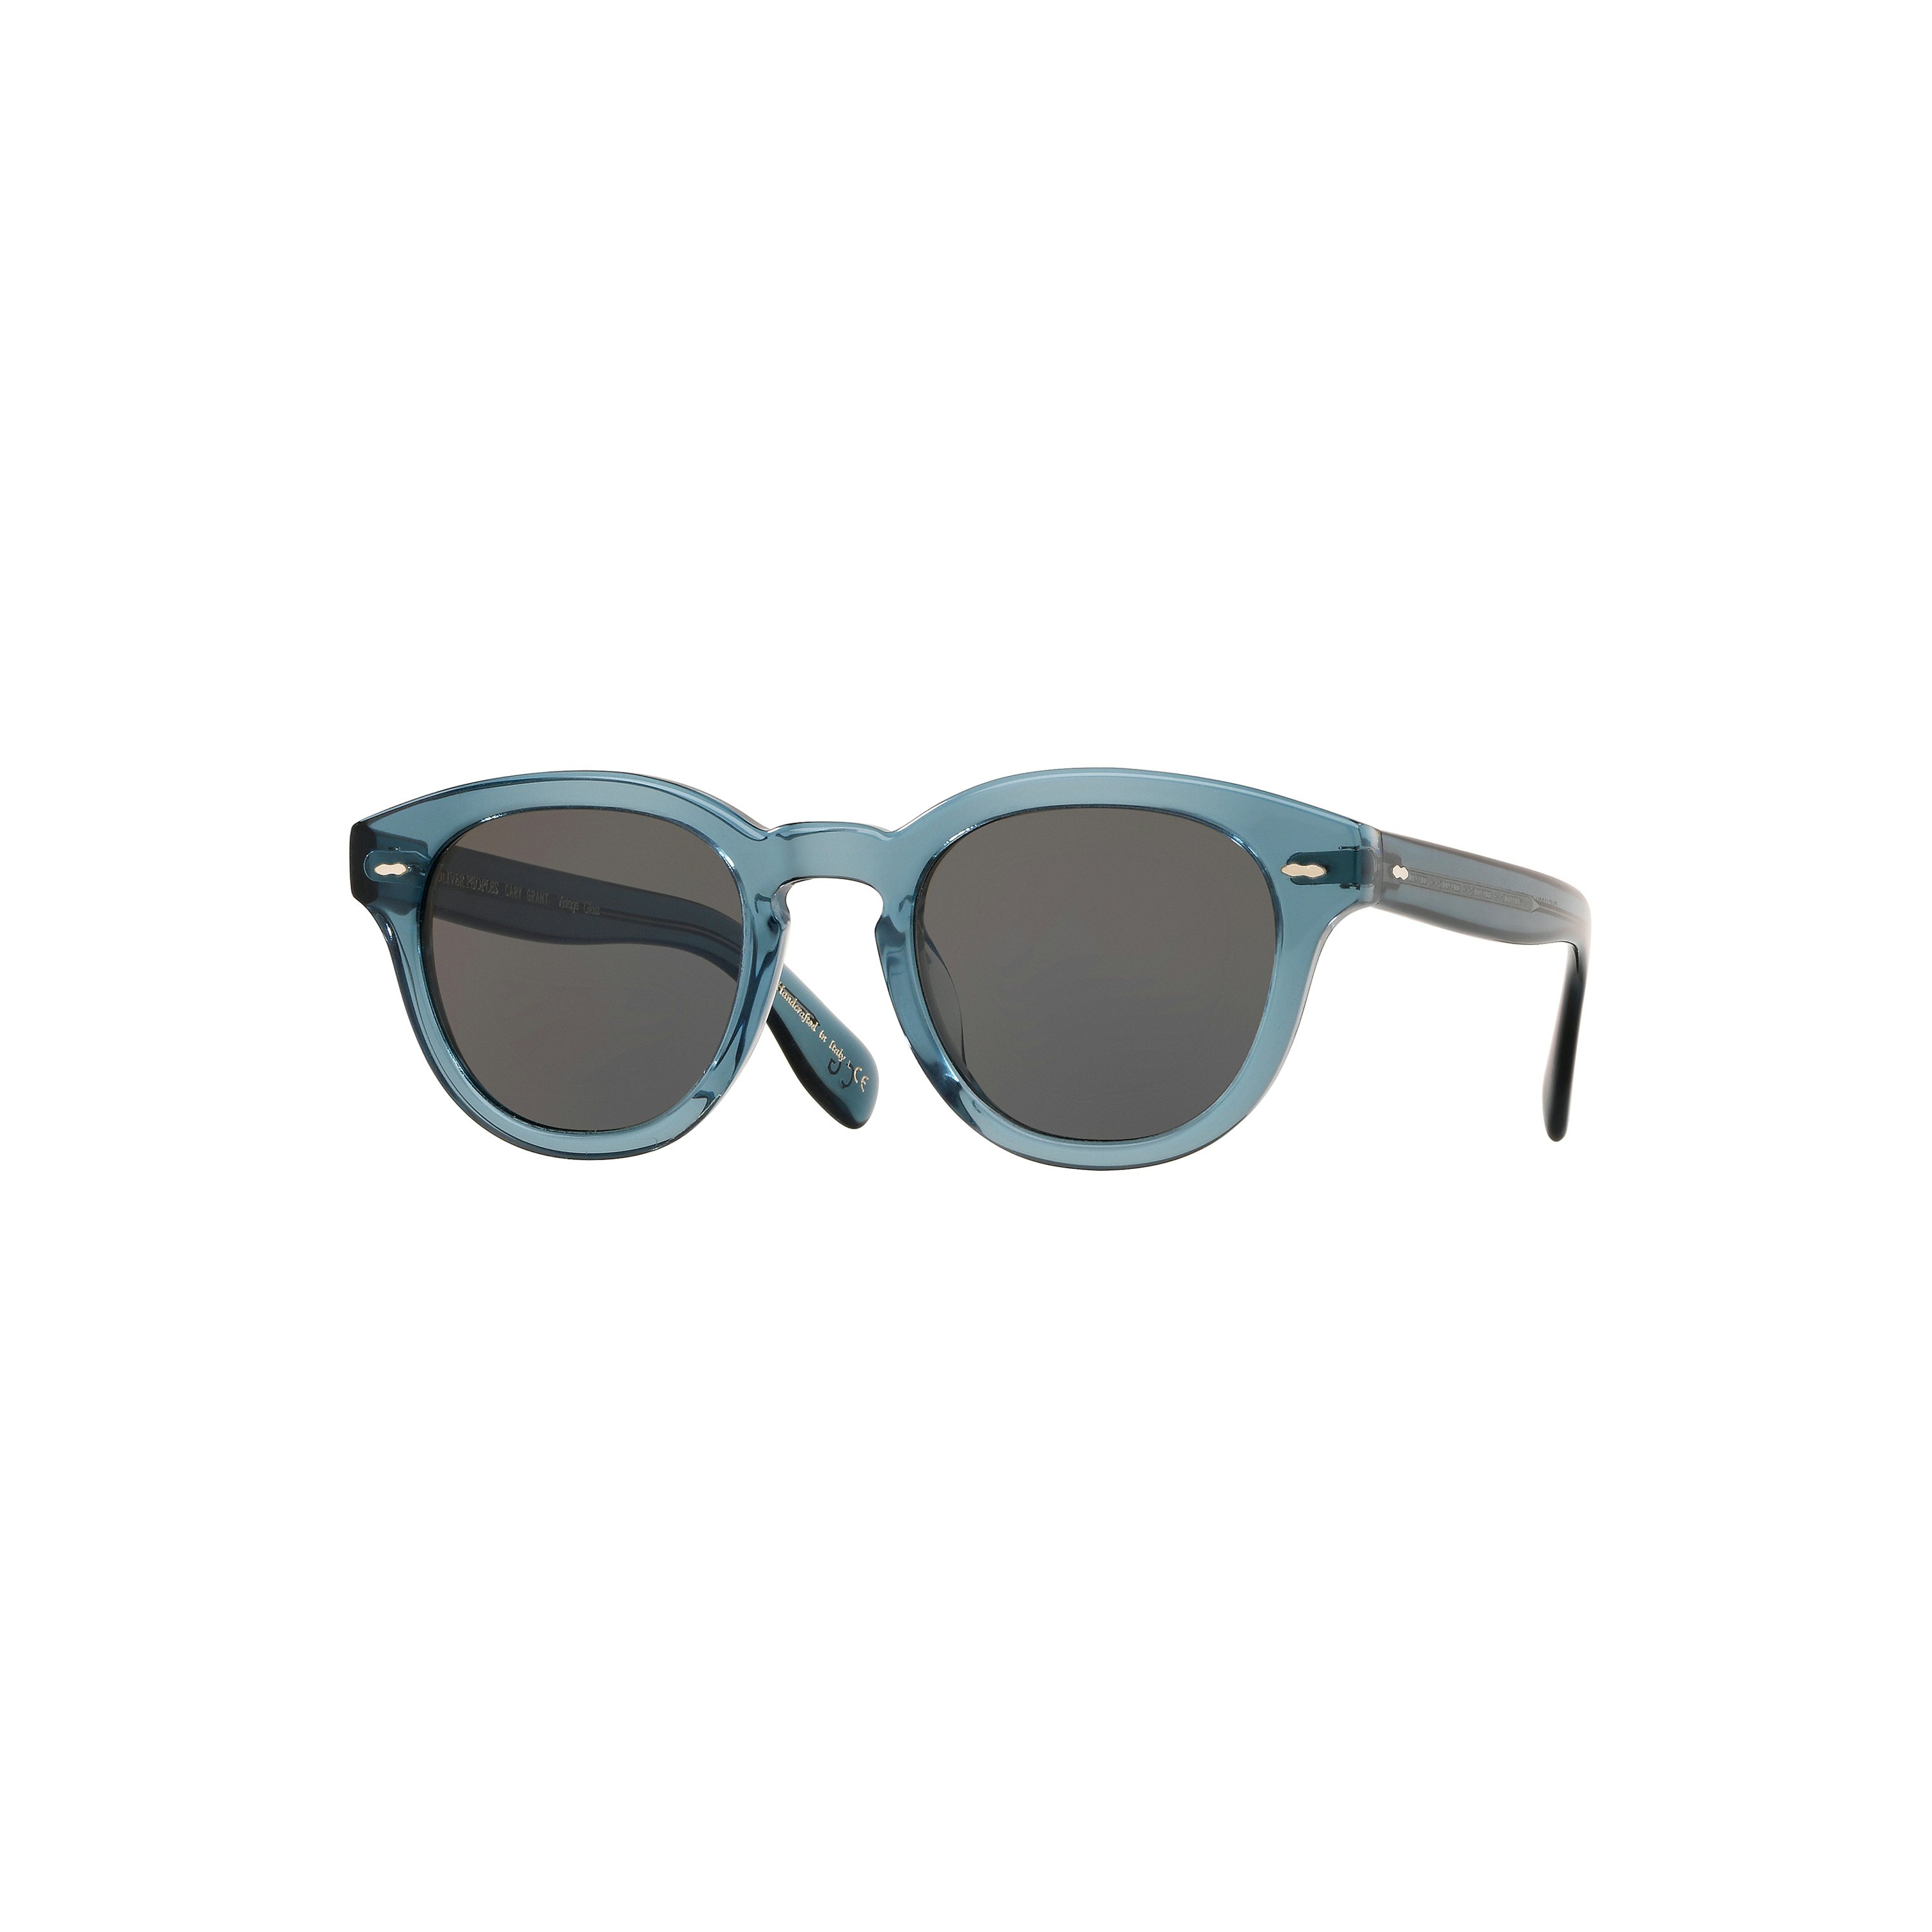 Oliver Peoples Cary Grant Sunglasses in Brown,Neutral